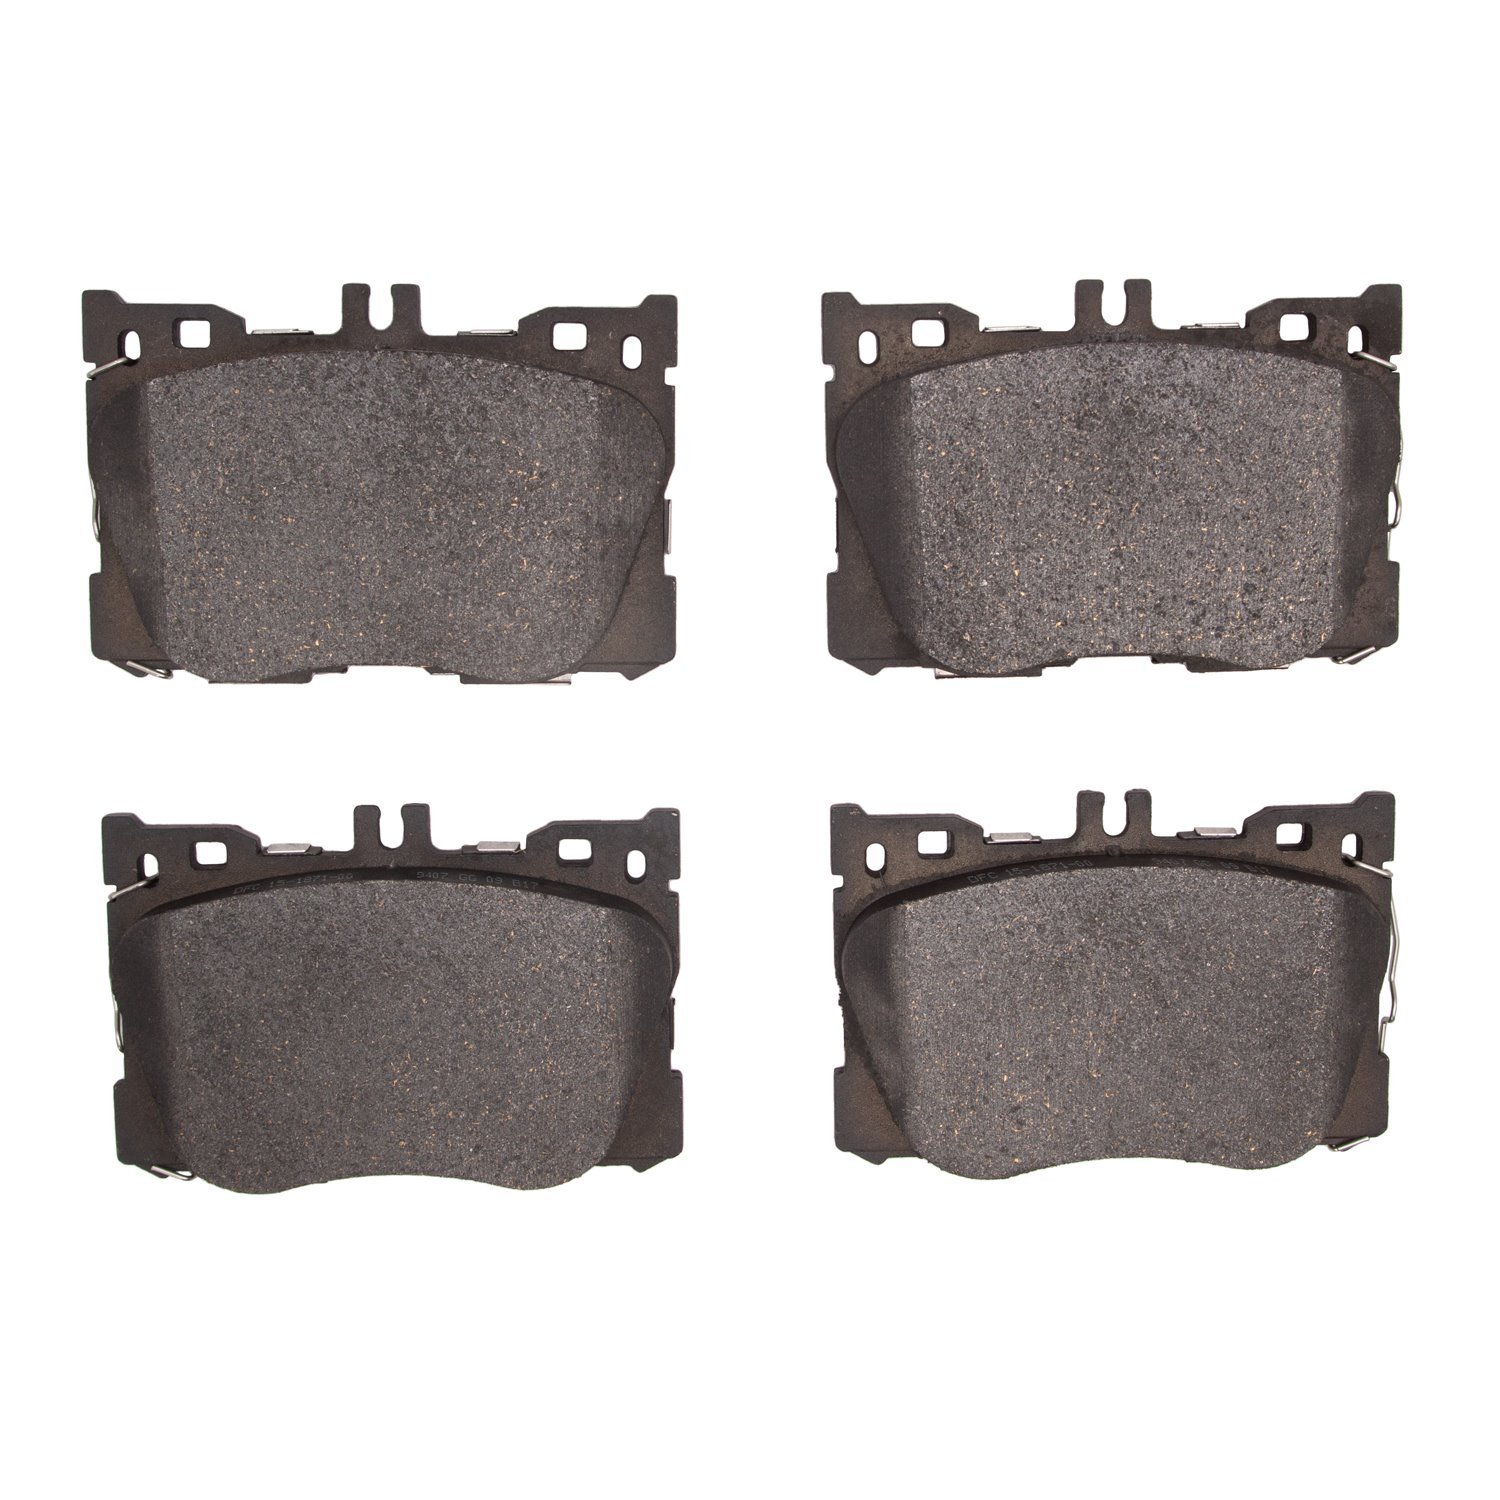 1551-1871-00 5000 Advanced Ceramic Brake Pads, Fits Select Mercedes-Benz, Position: Front